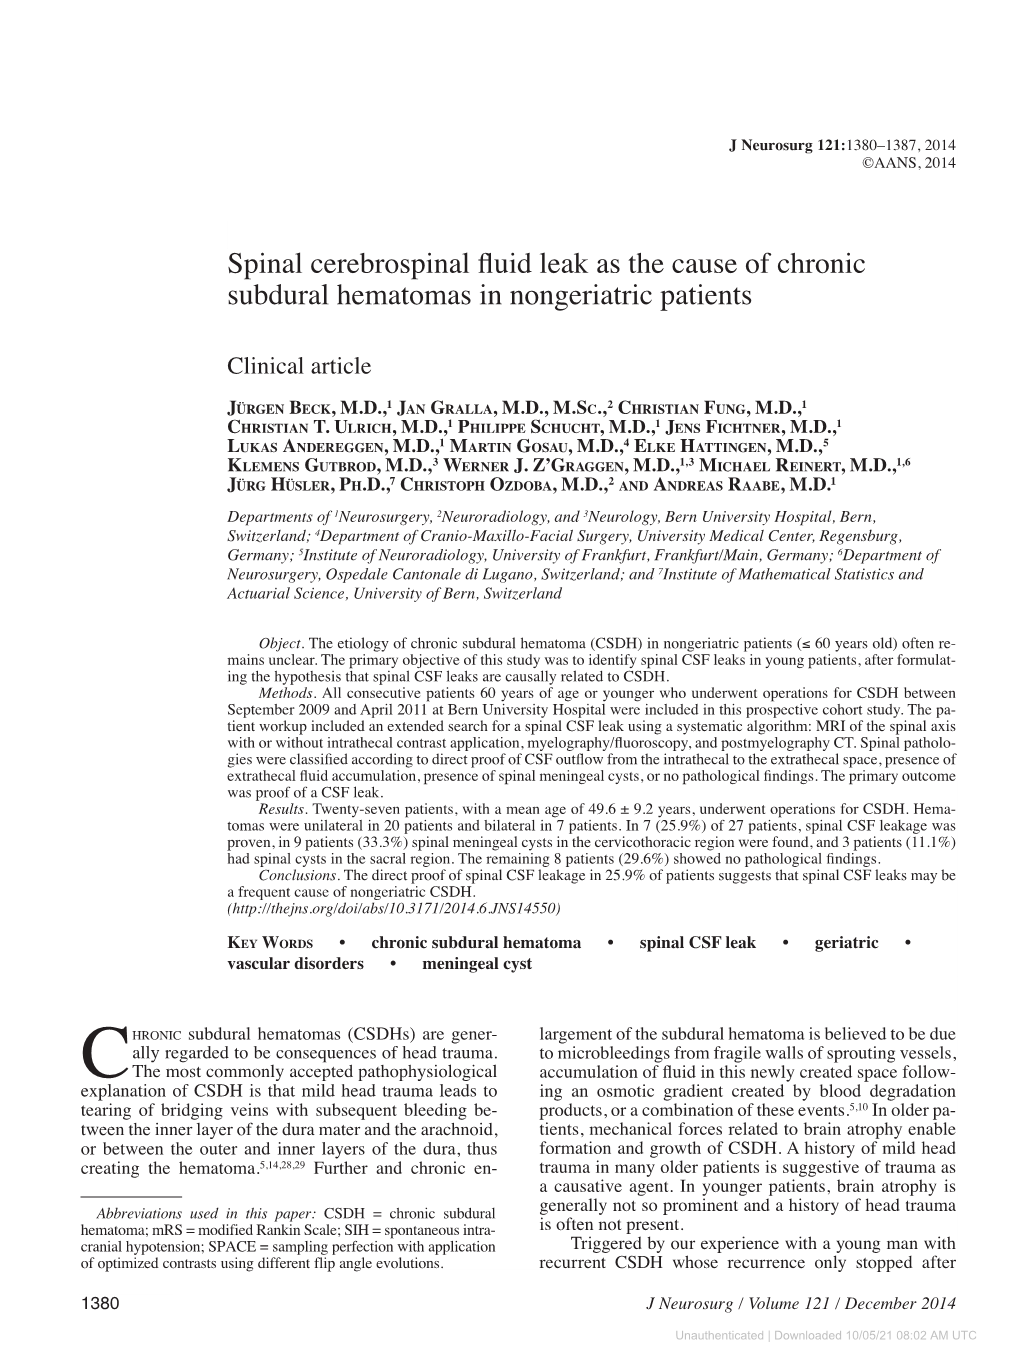 Spinal Cerebrospinal Fluid Leak As the Cause of Chronic Subdural Hematomas in Nongeriatric Patients